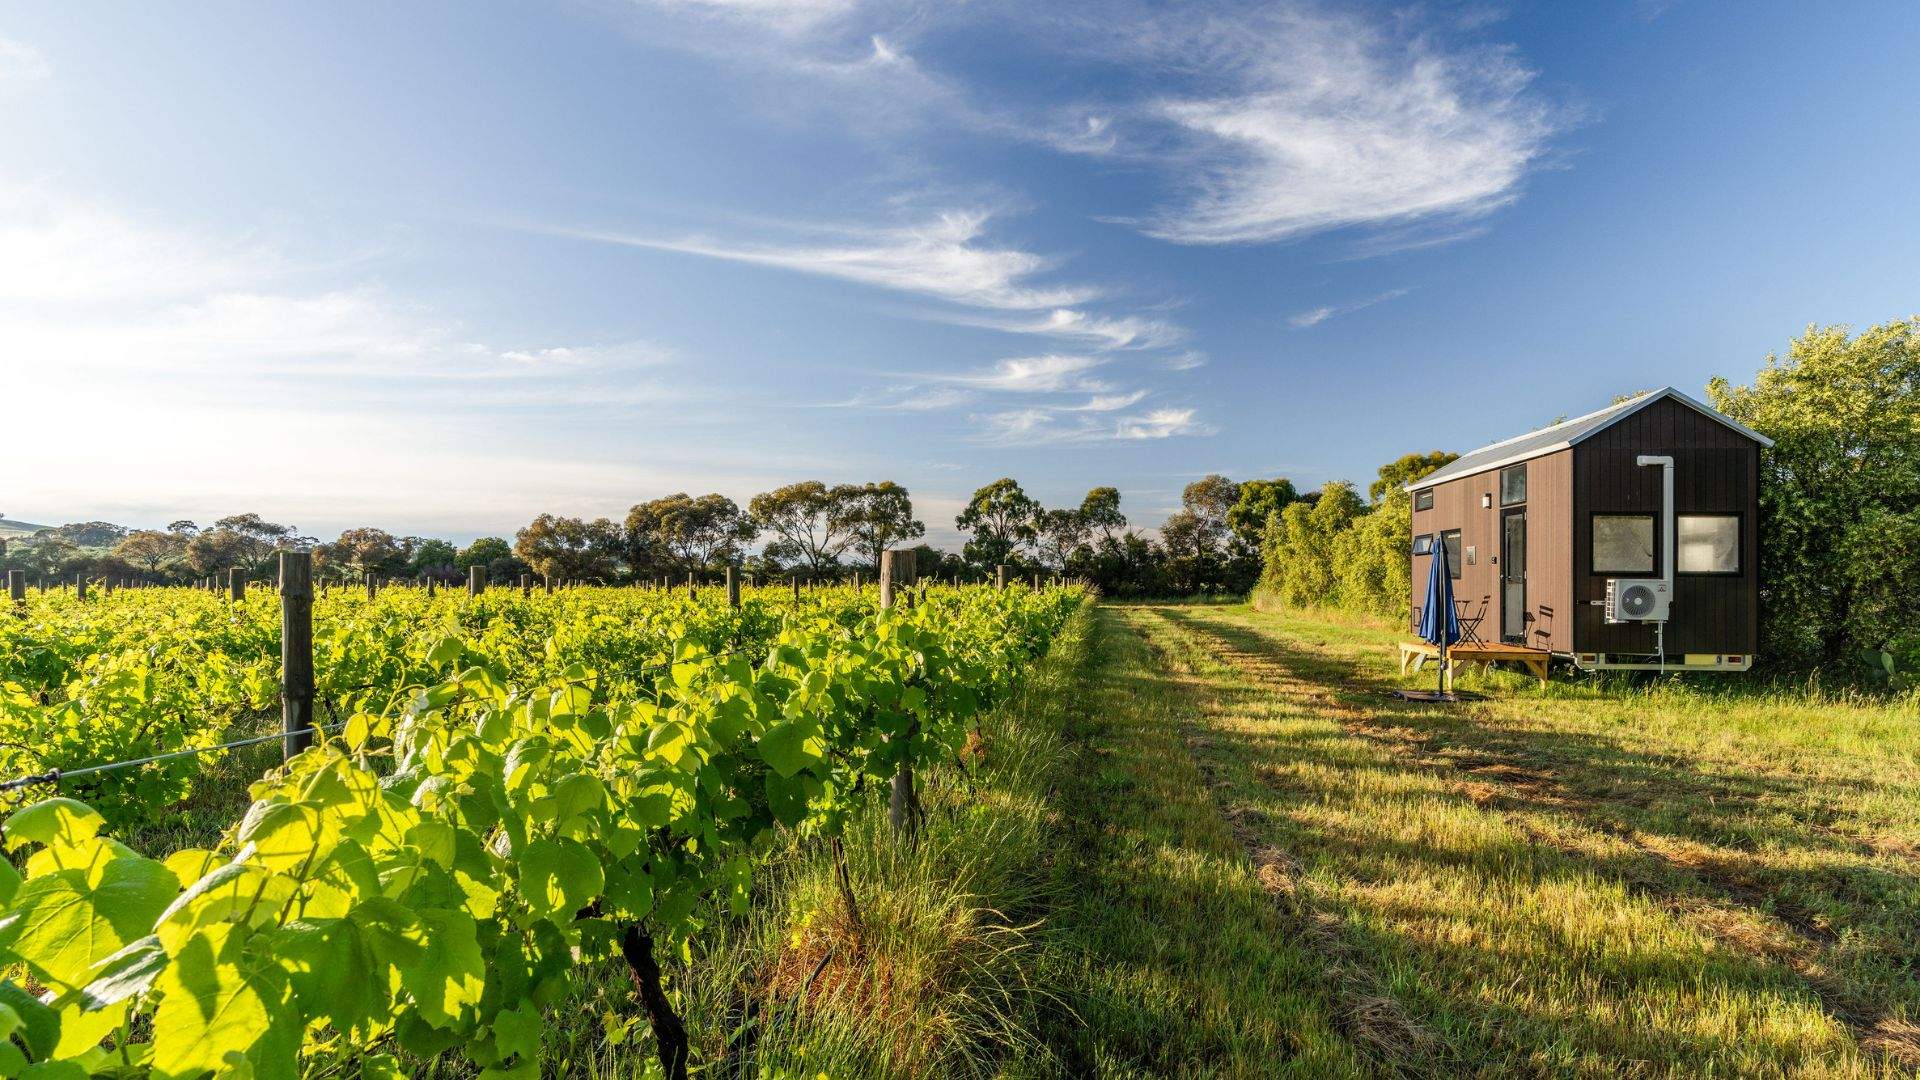 Tiny Away's New Victorian Tiny Stay Is Nestled Among the Vineyards in Heathcote Wine Country